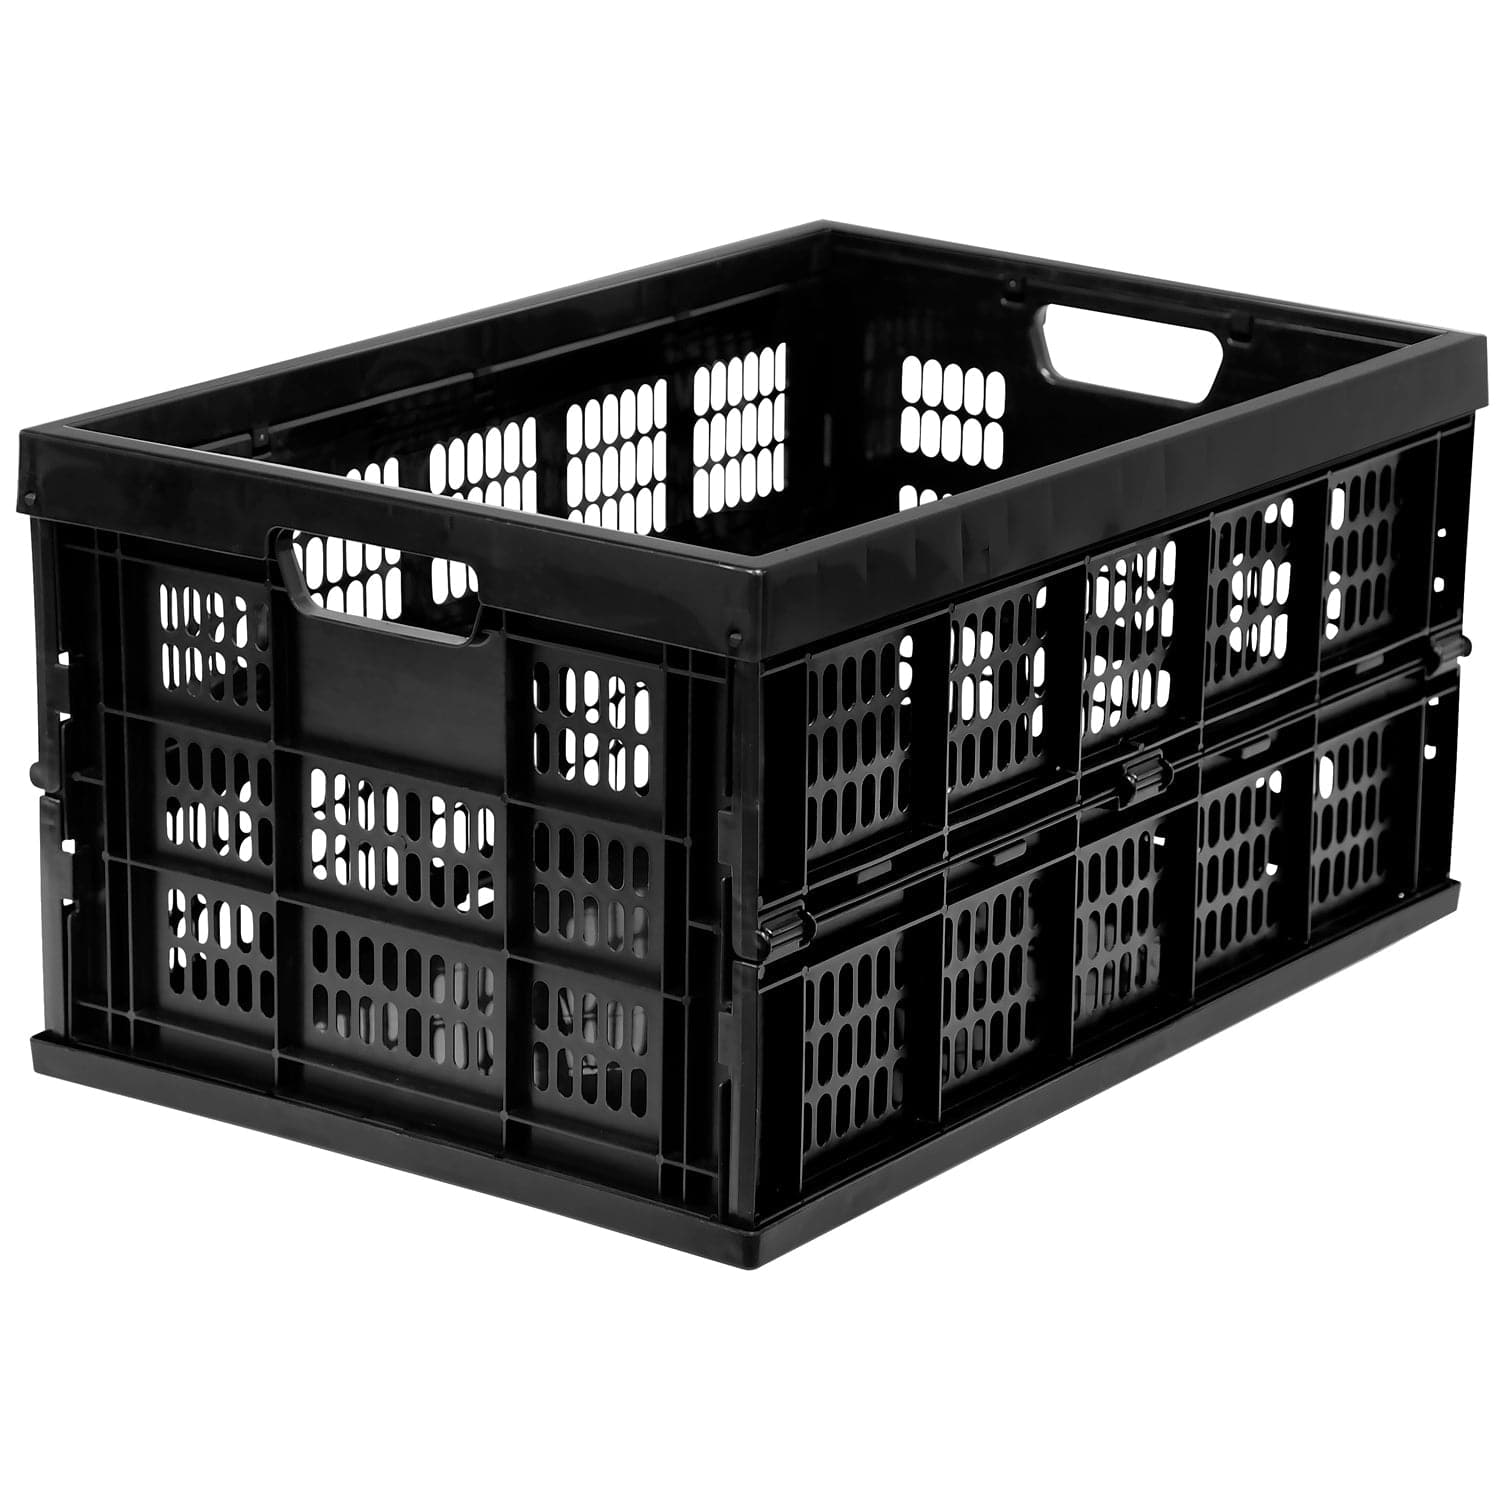 https://cdn.shopify.com/s/files/1/0051/3674/4566/products/collapsible-milk-crate-542477.jpg?v=1687278919